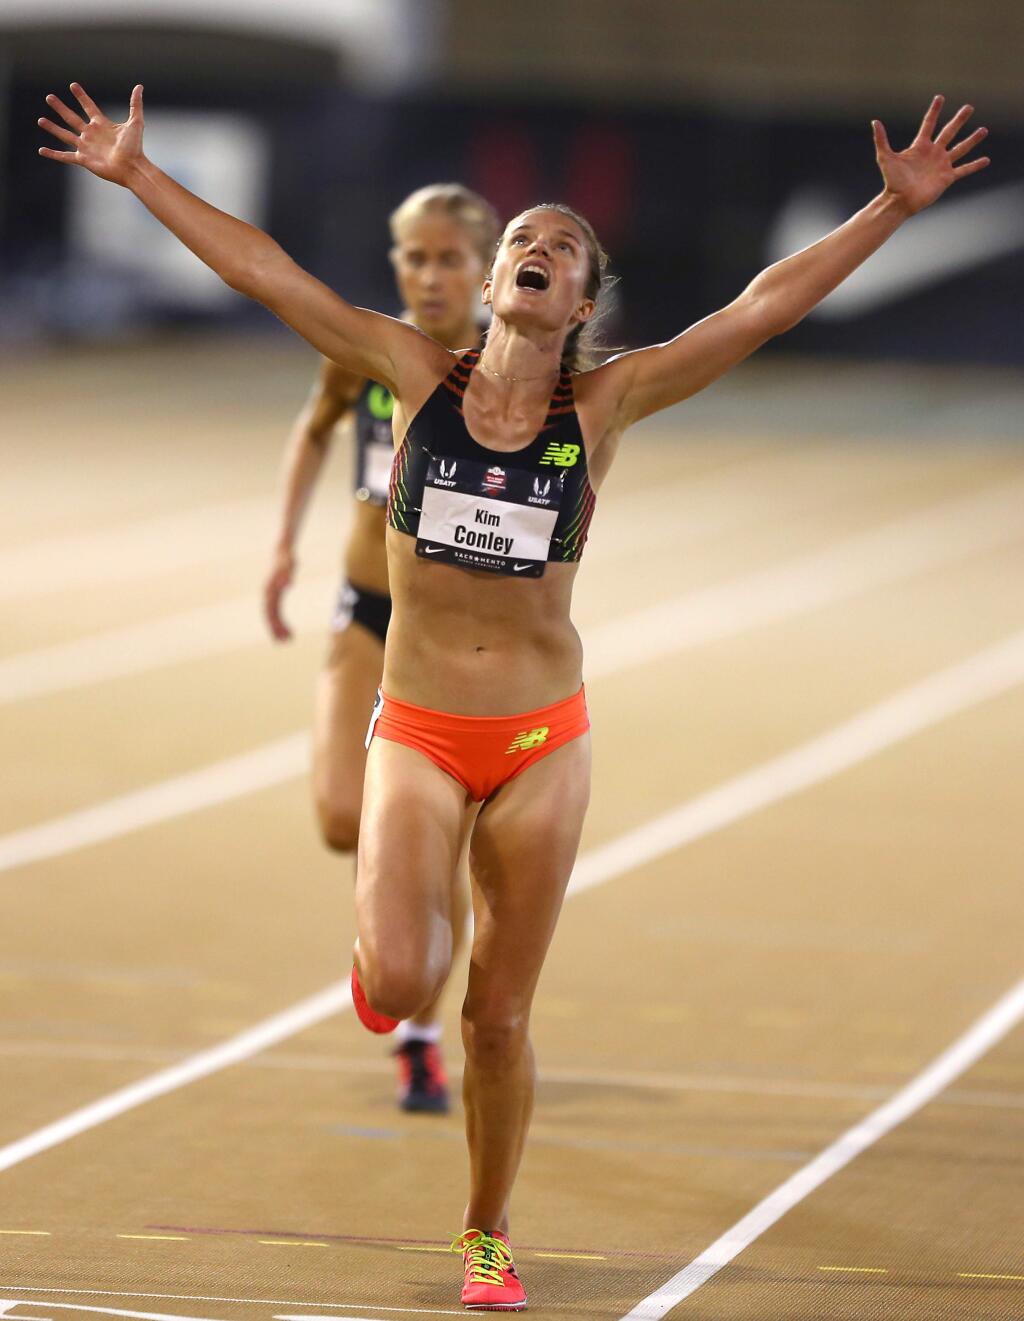 Kim Conley throws her arms up in celebration as she wins the 10,000-meter race at the USA Track and Field Outdoor Championships in Sacramento on Thursday, June 26, 2014. (Christopher Chung / The Press Democrat)